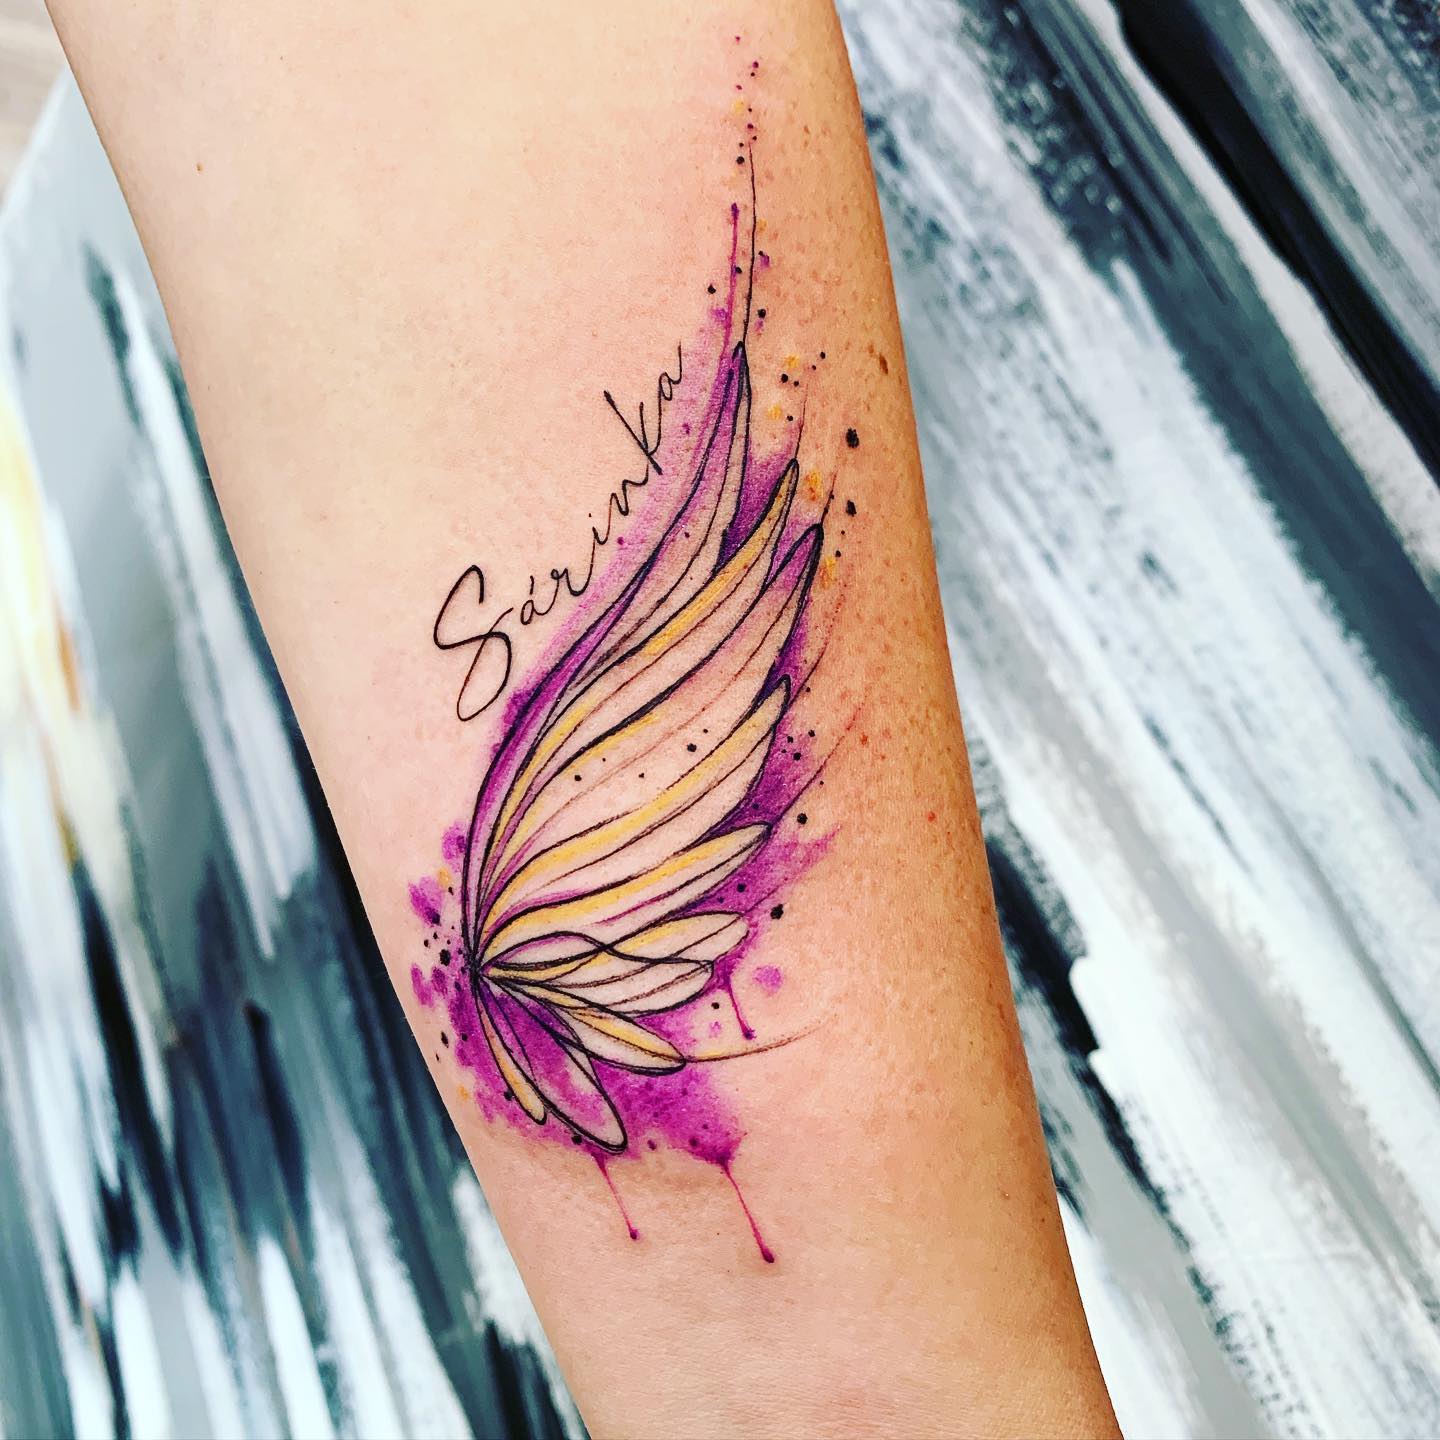 S.A.V.I 3D Temporary Tattoo Roaring Goddess Wings Flying Birds Feather  Design, Black, 21 x 15 cm, 10 g : Amazon.in: Beauty